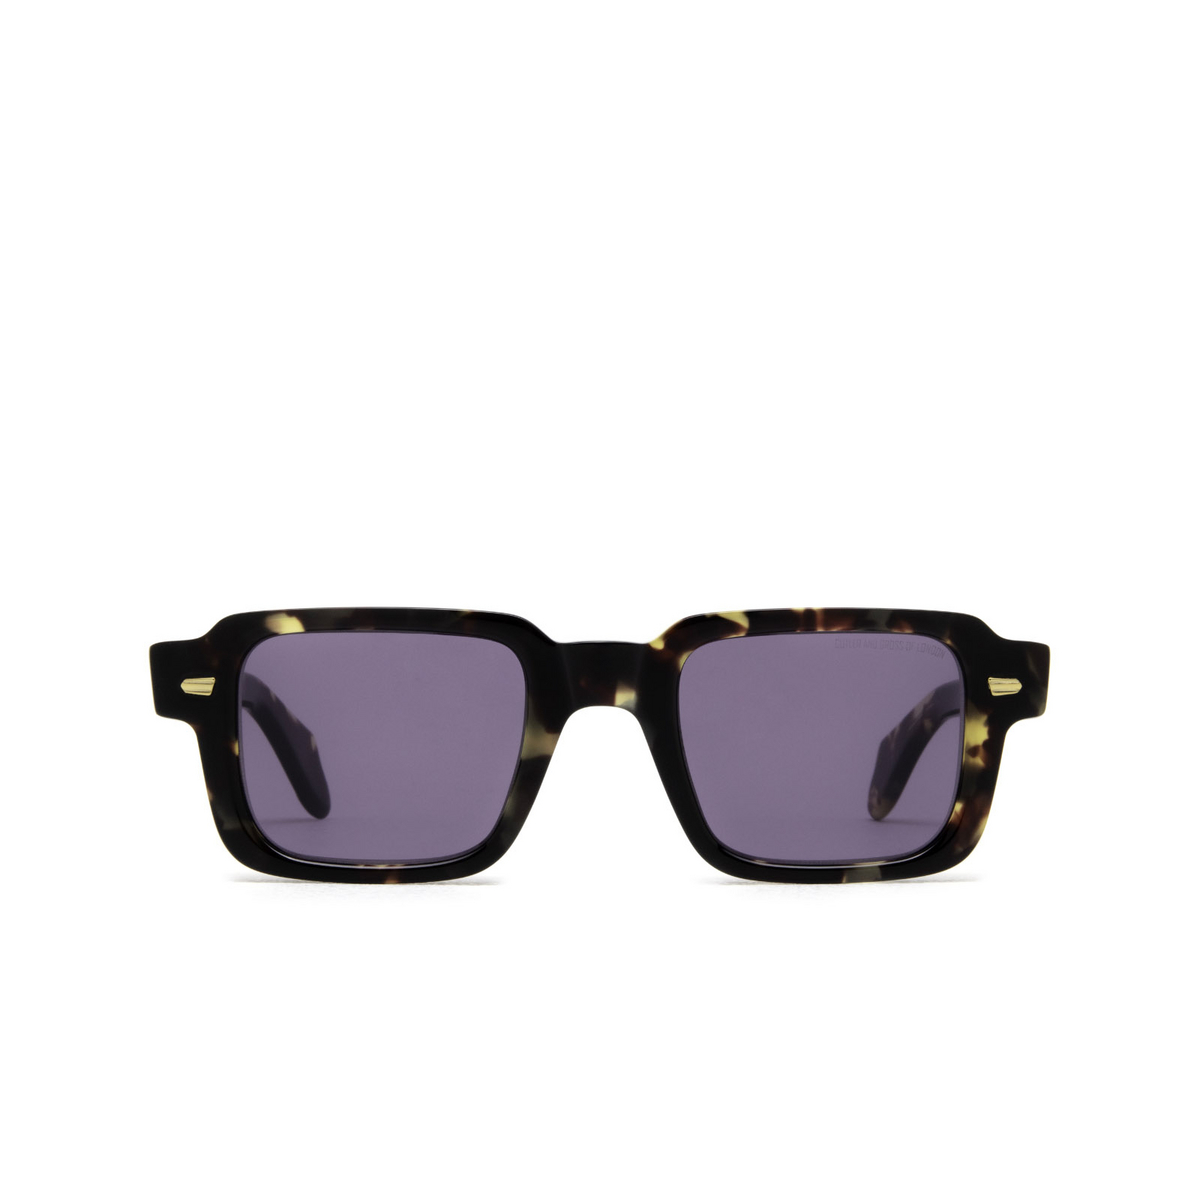 Cutler and Gross 1393 Sunglasses 02 Urban Camo - front view